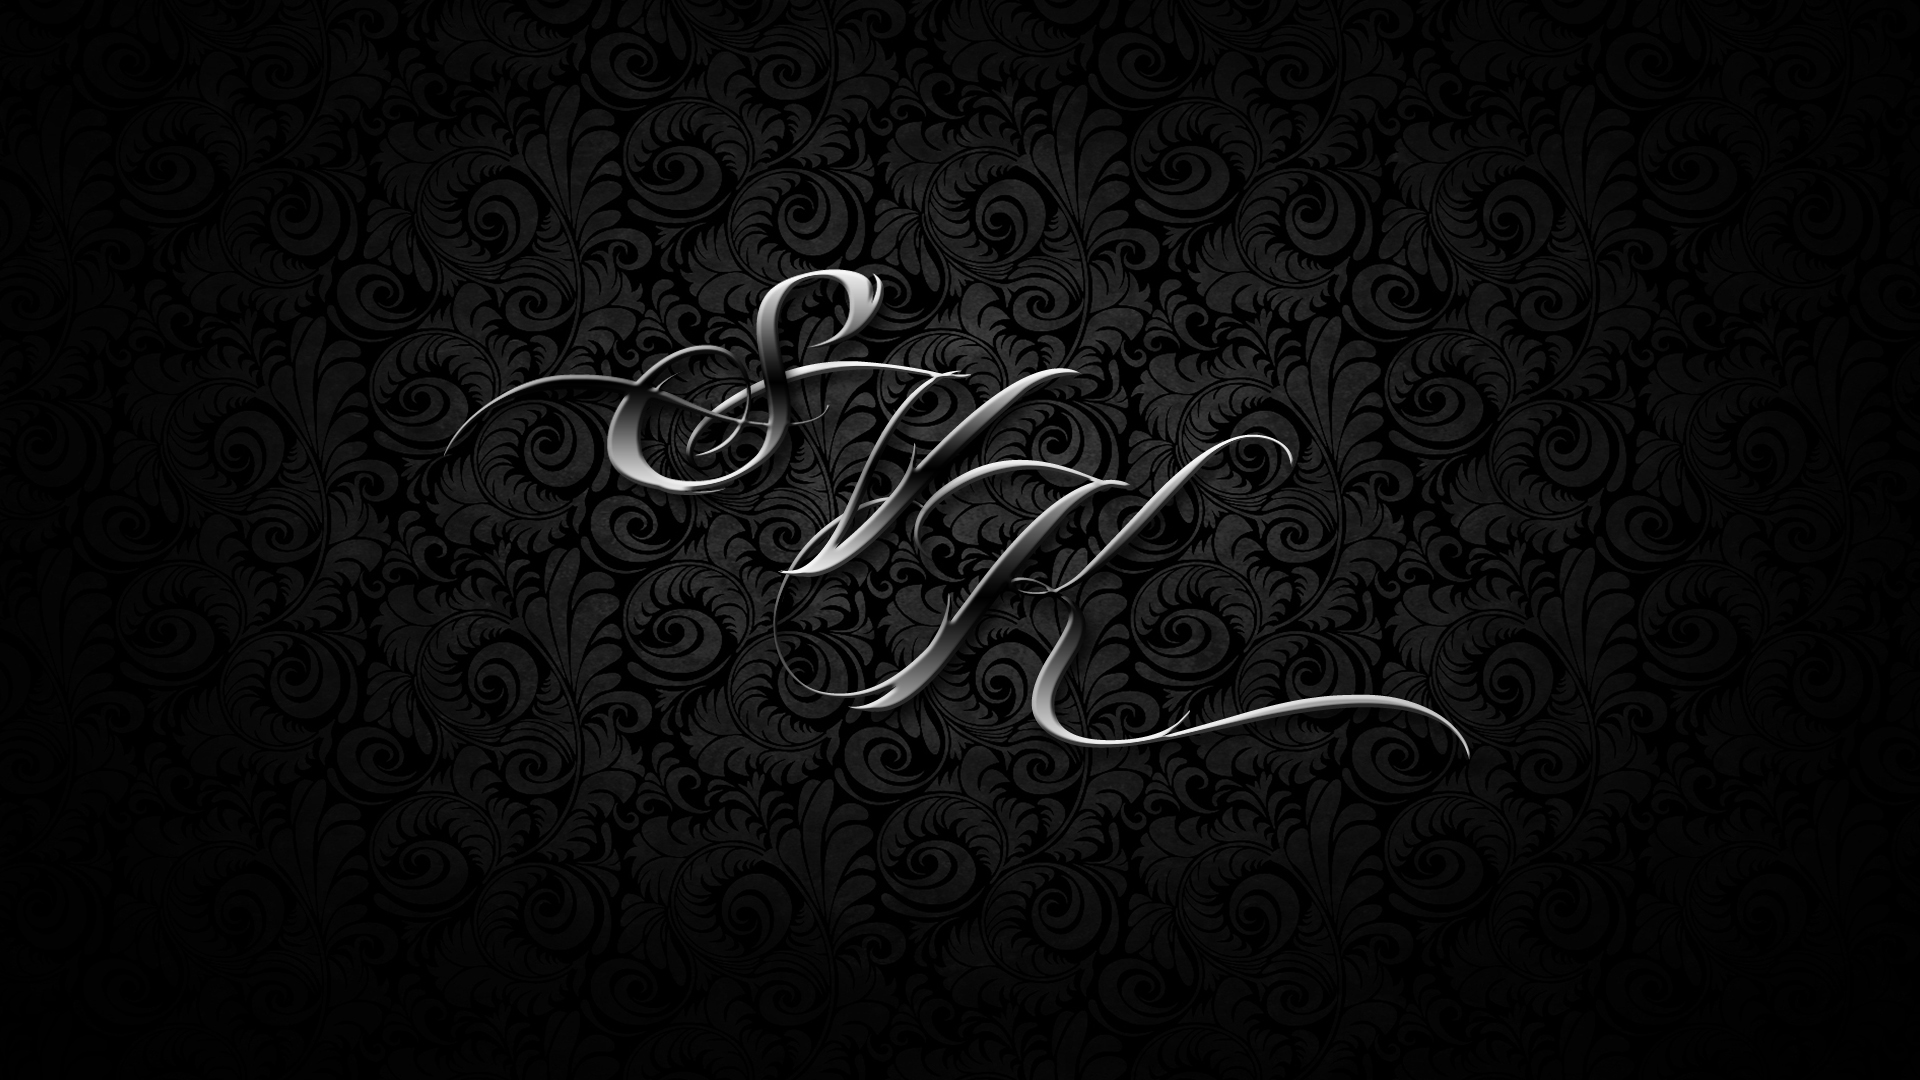 Trying out wallpapers with my Initials | Stefan Kamer: My Thoughts ...